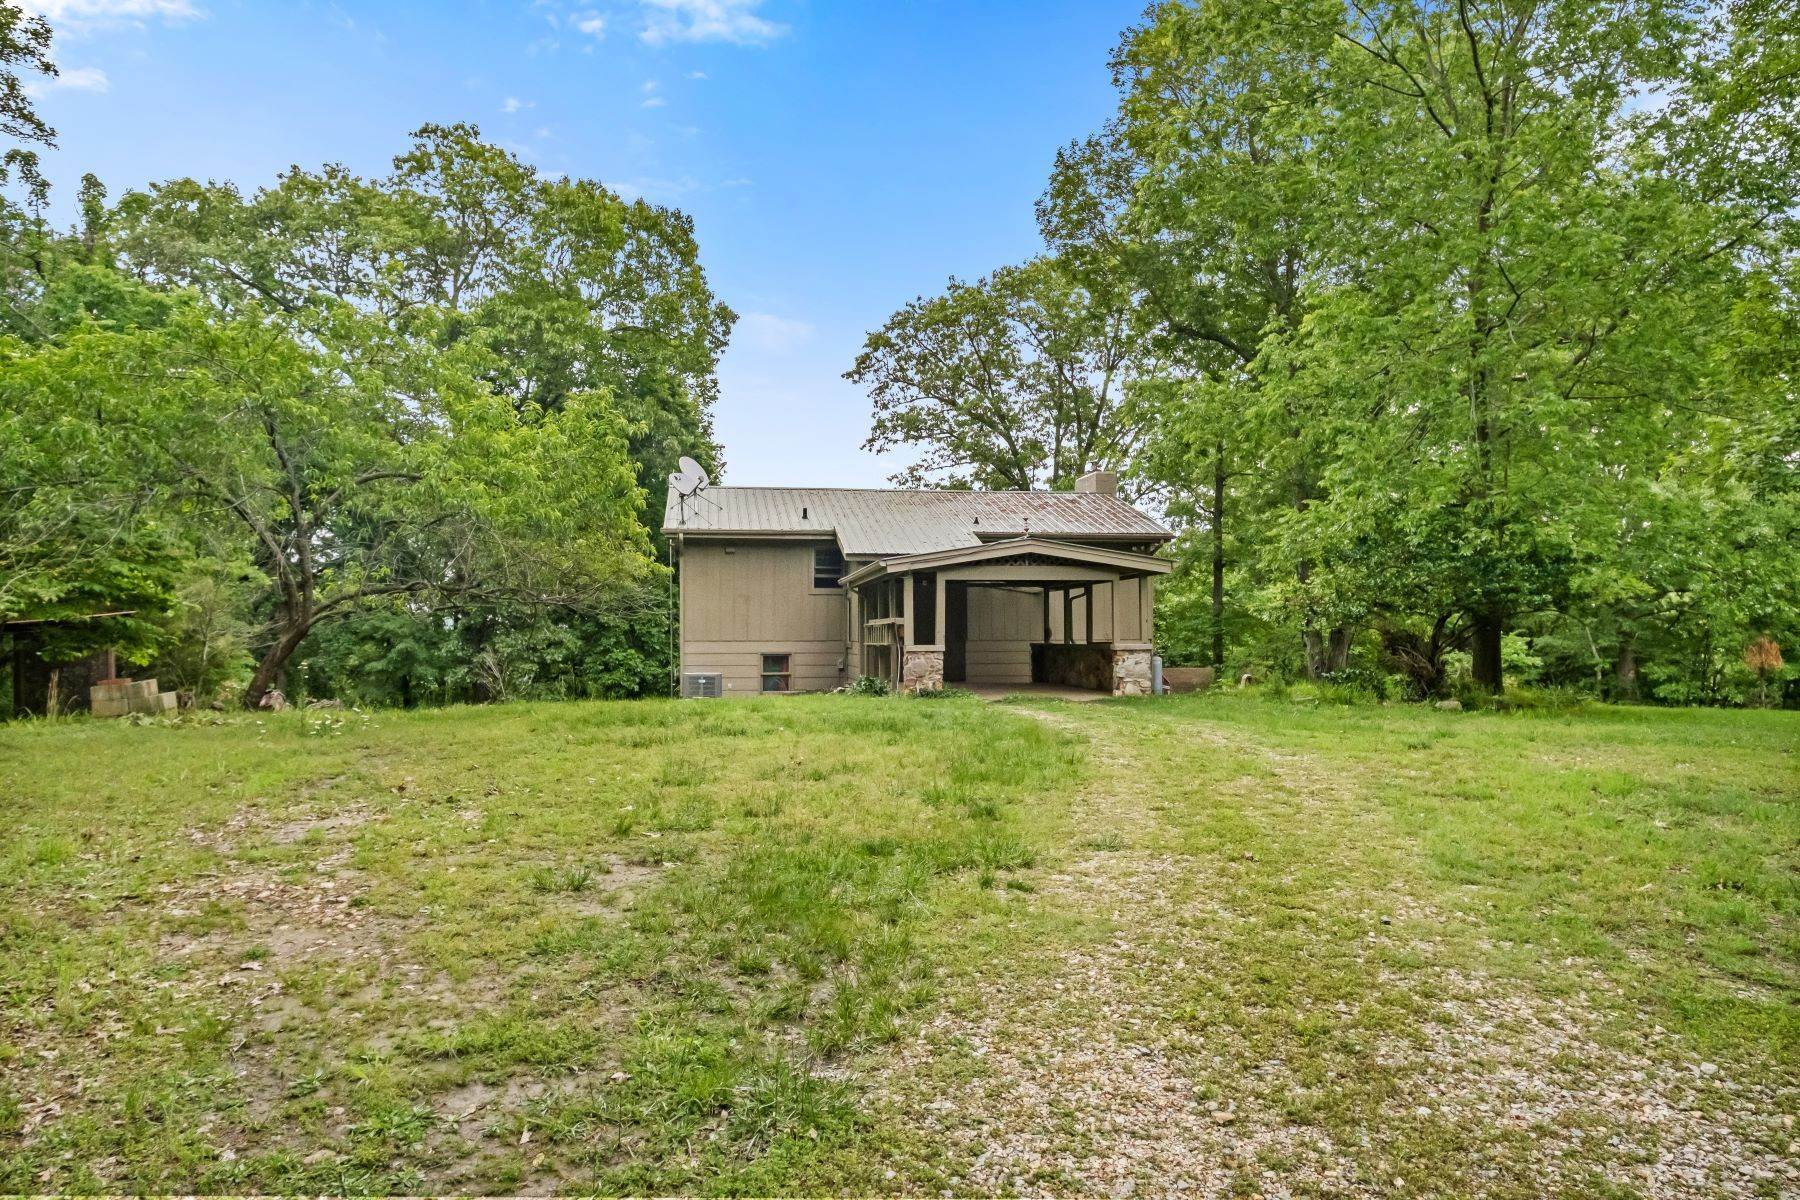 22. Single Family Homes for Sale at 1042 County Road 155, Eureka Springs, AR 72632 1042 County Road 155 Eureka Springs, Arkansas 72632 United States